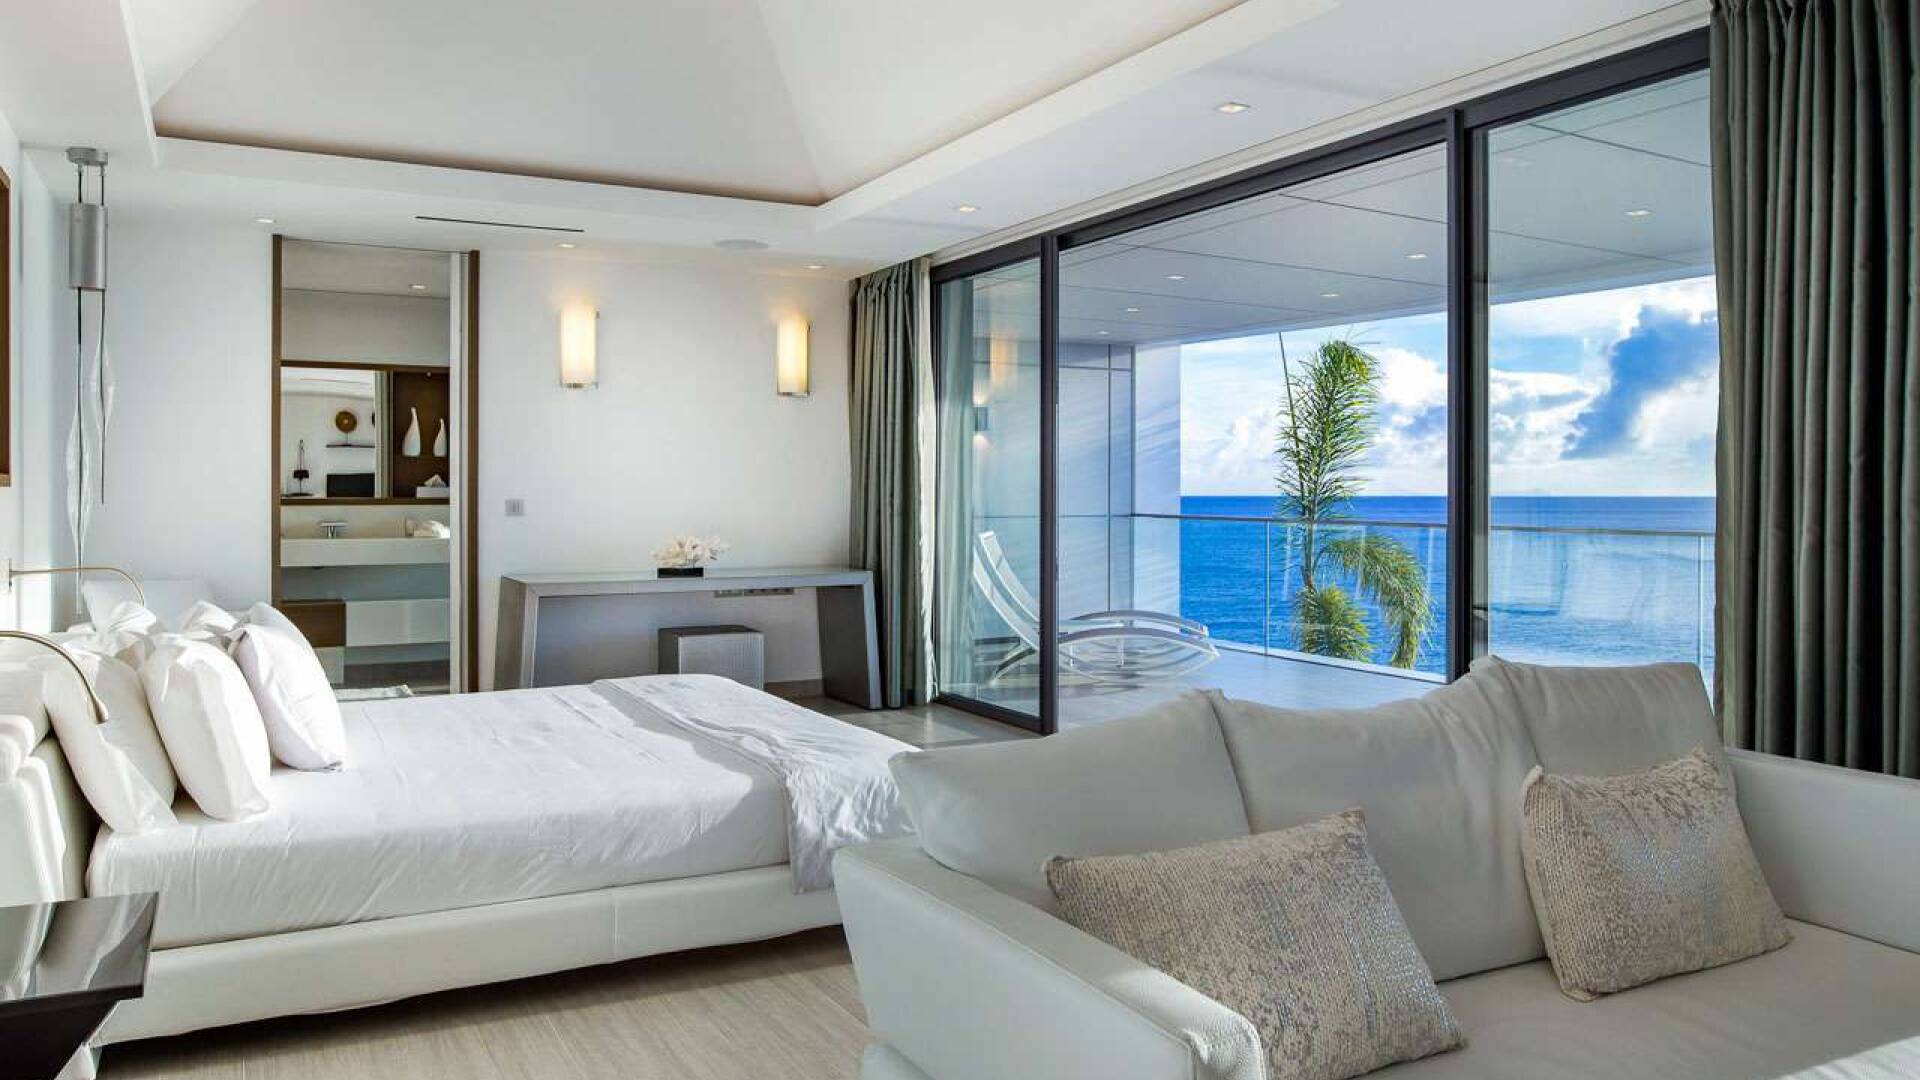 Bedroom at WV AXL, Gustavia, St. Barthelemy